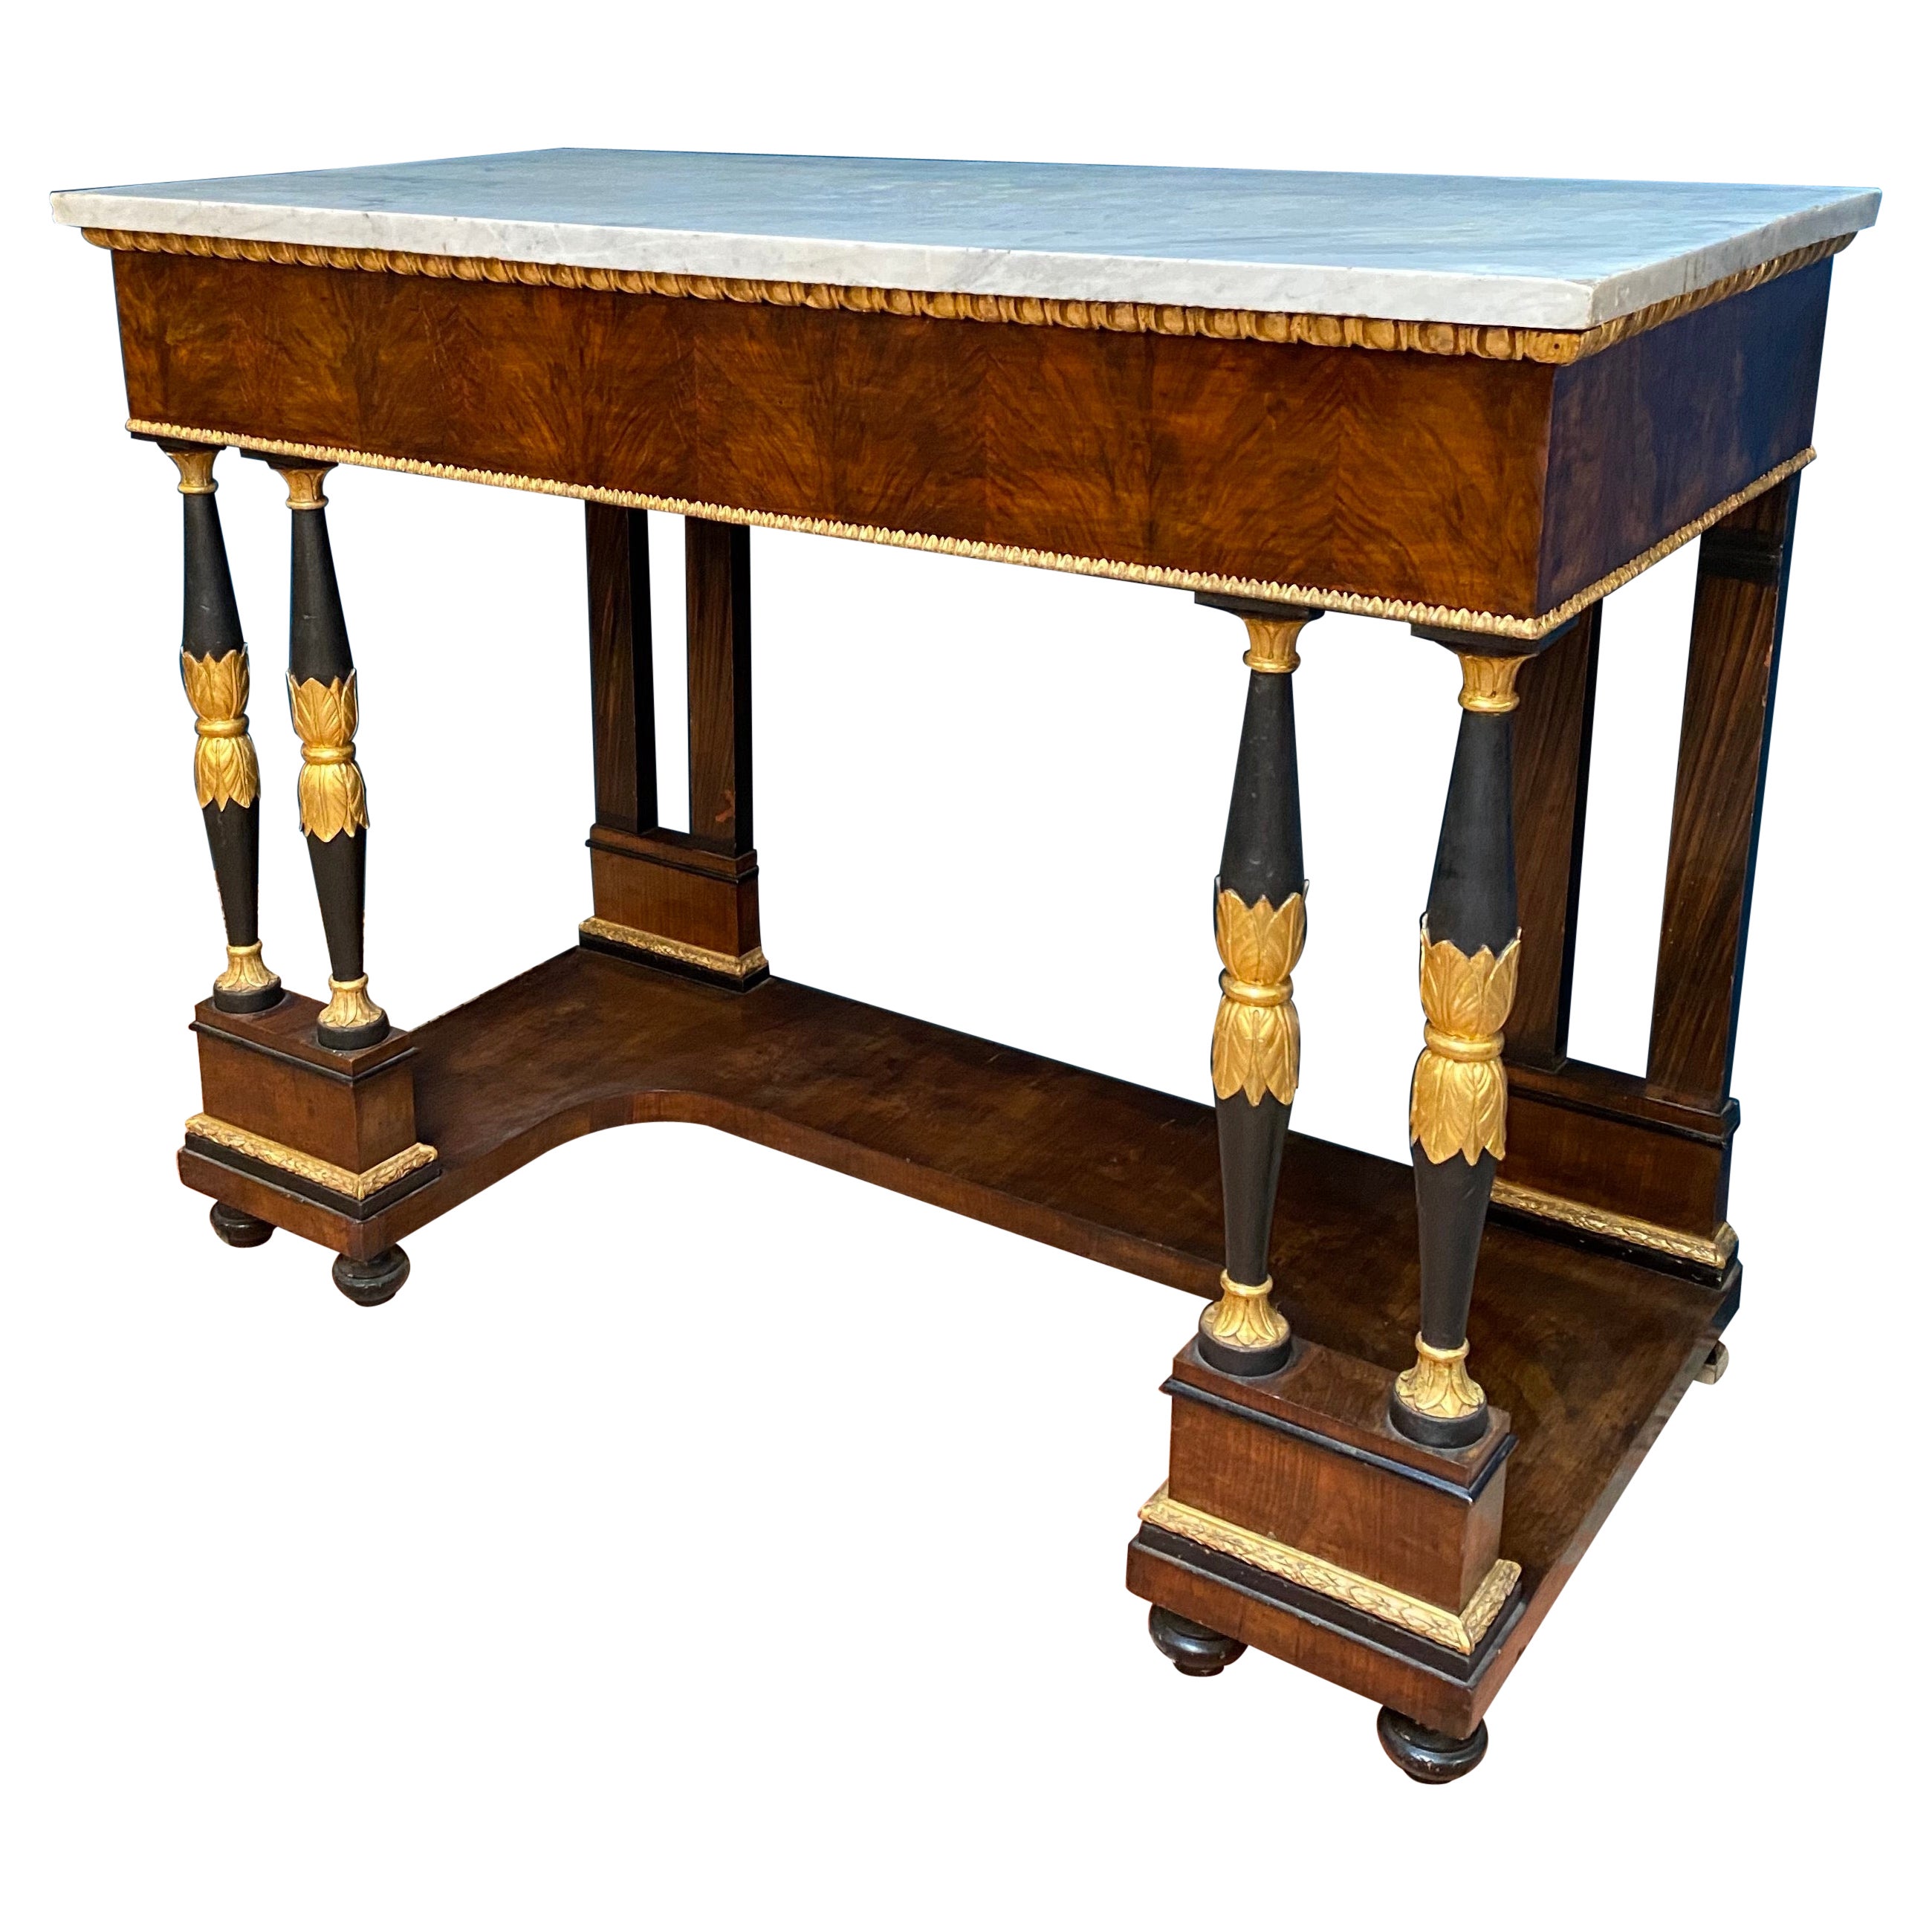 Elegant Italian Empire Consoles Tables with White Marble Top, 1815